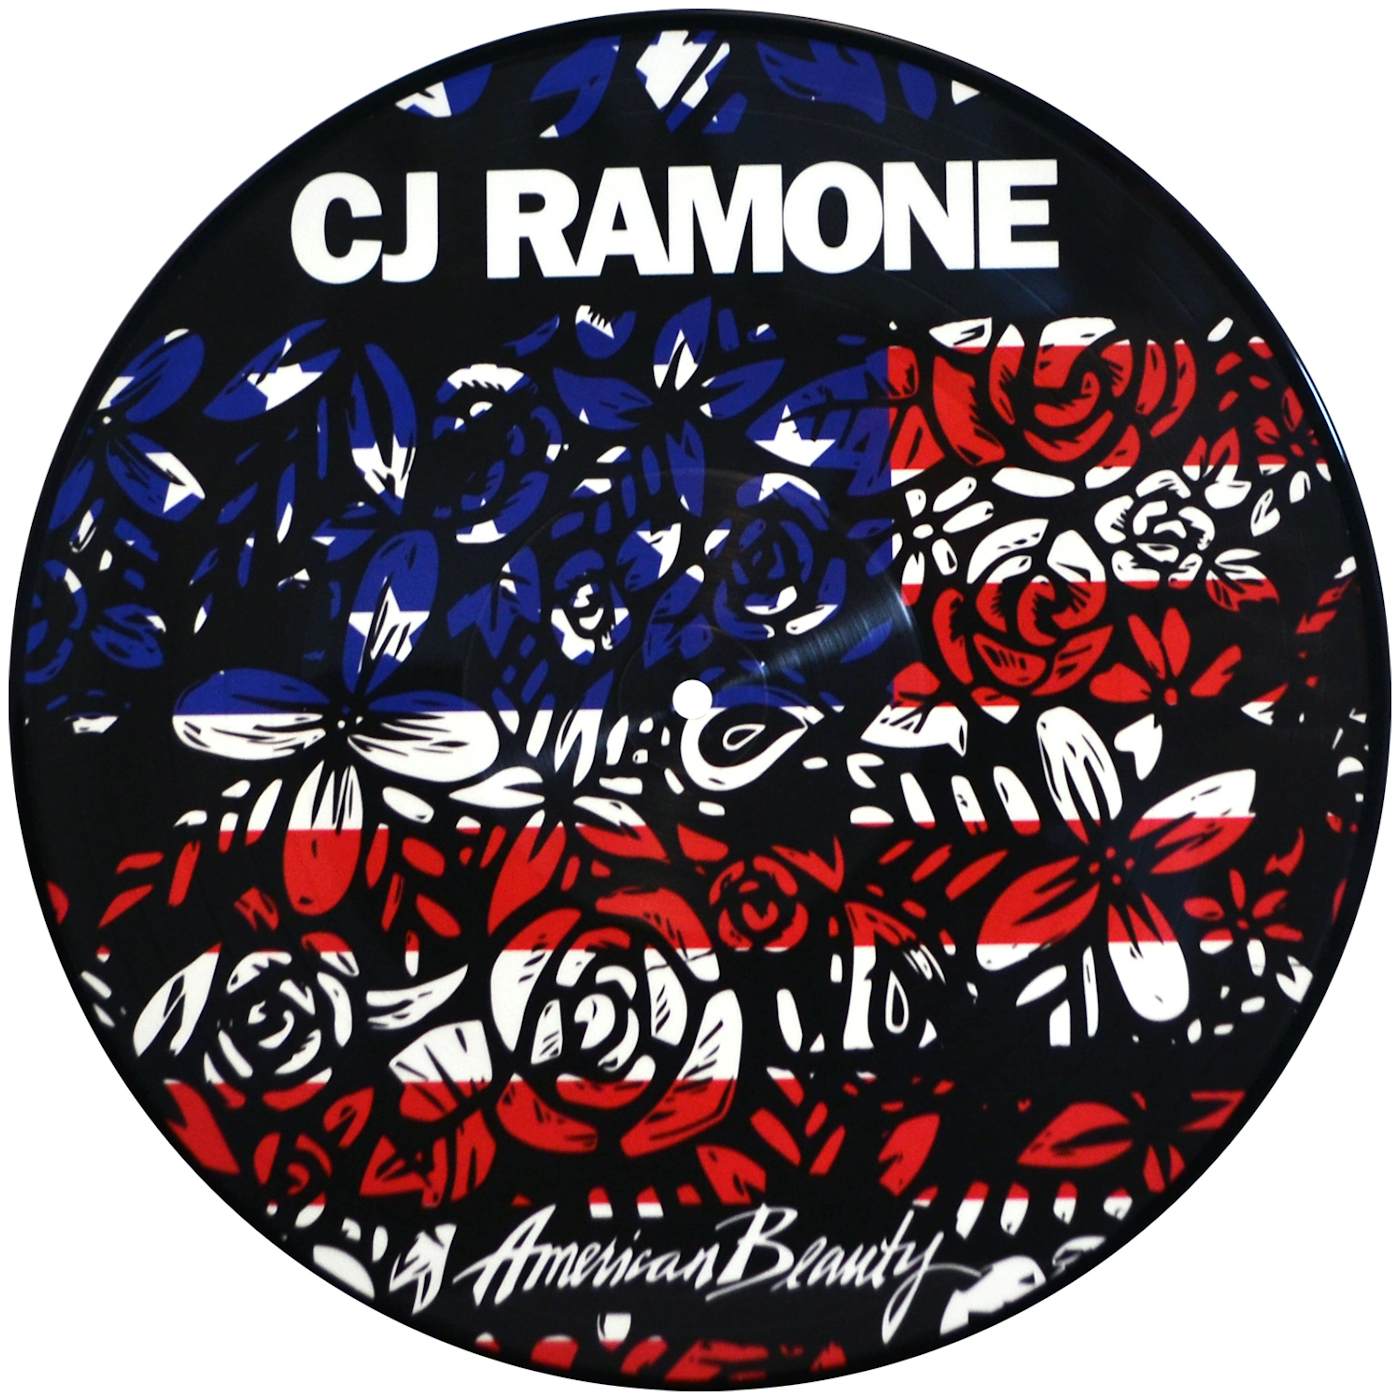 CJ Ramone AMERICAN BEAUTY (PICTURE DISC/LIMITED) Vinyl Record